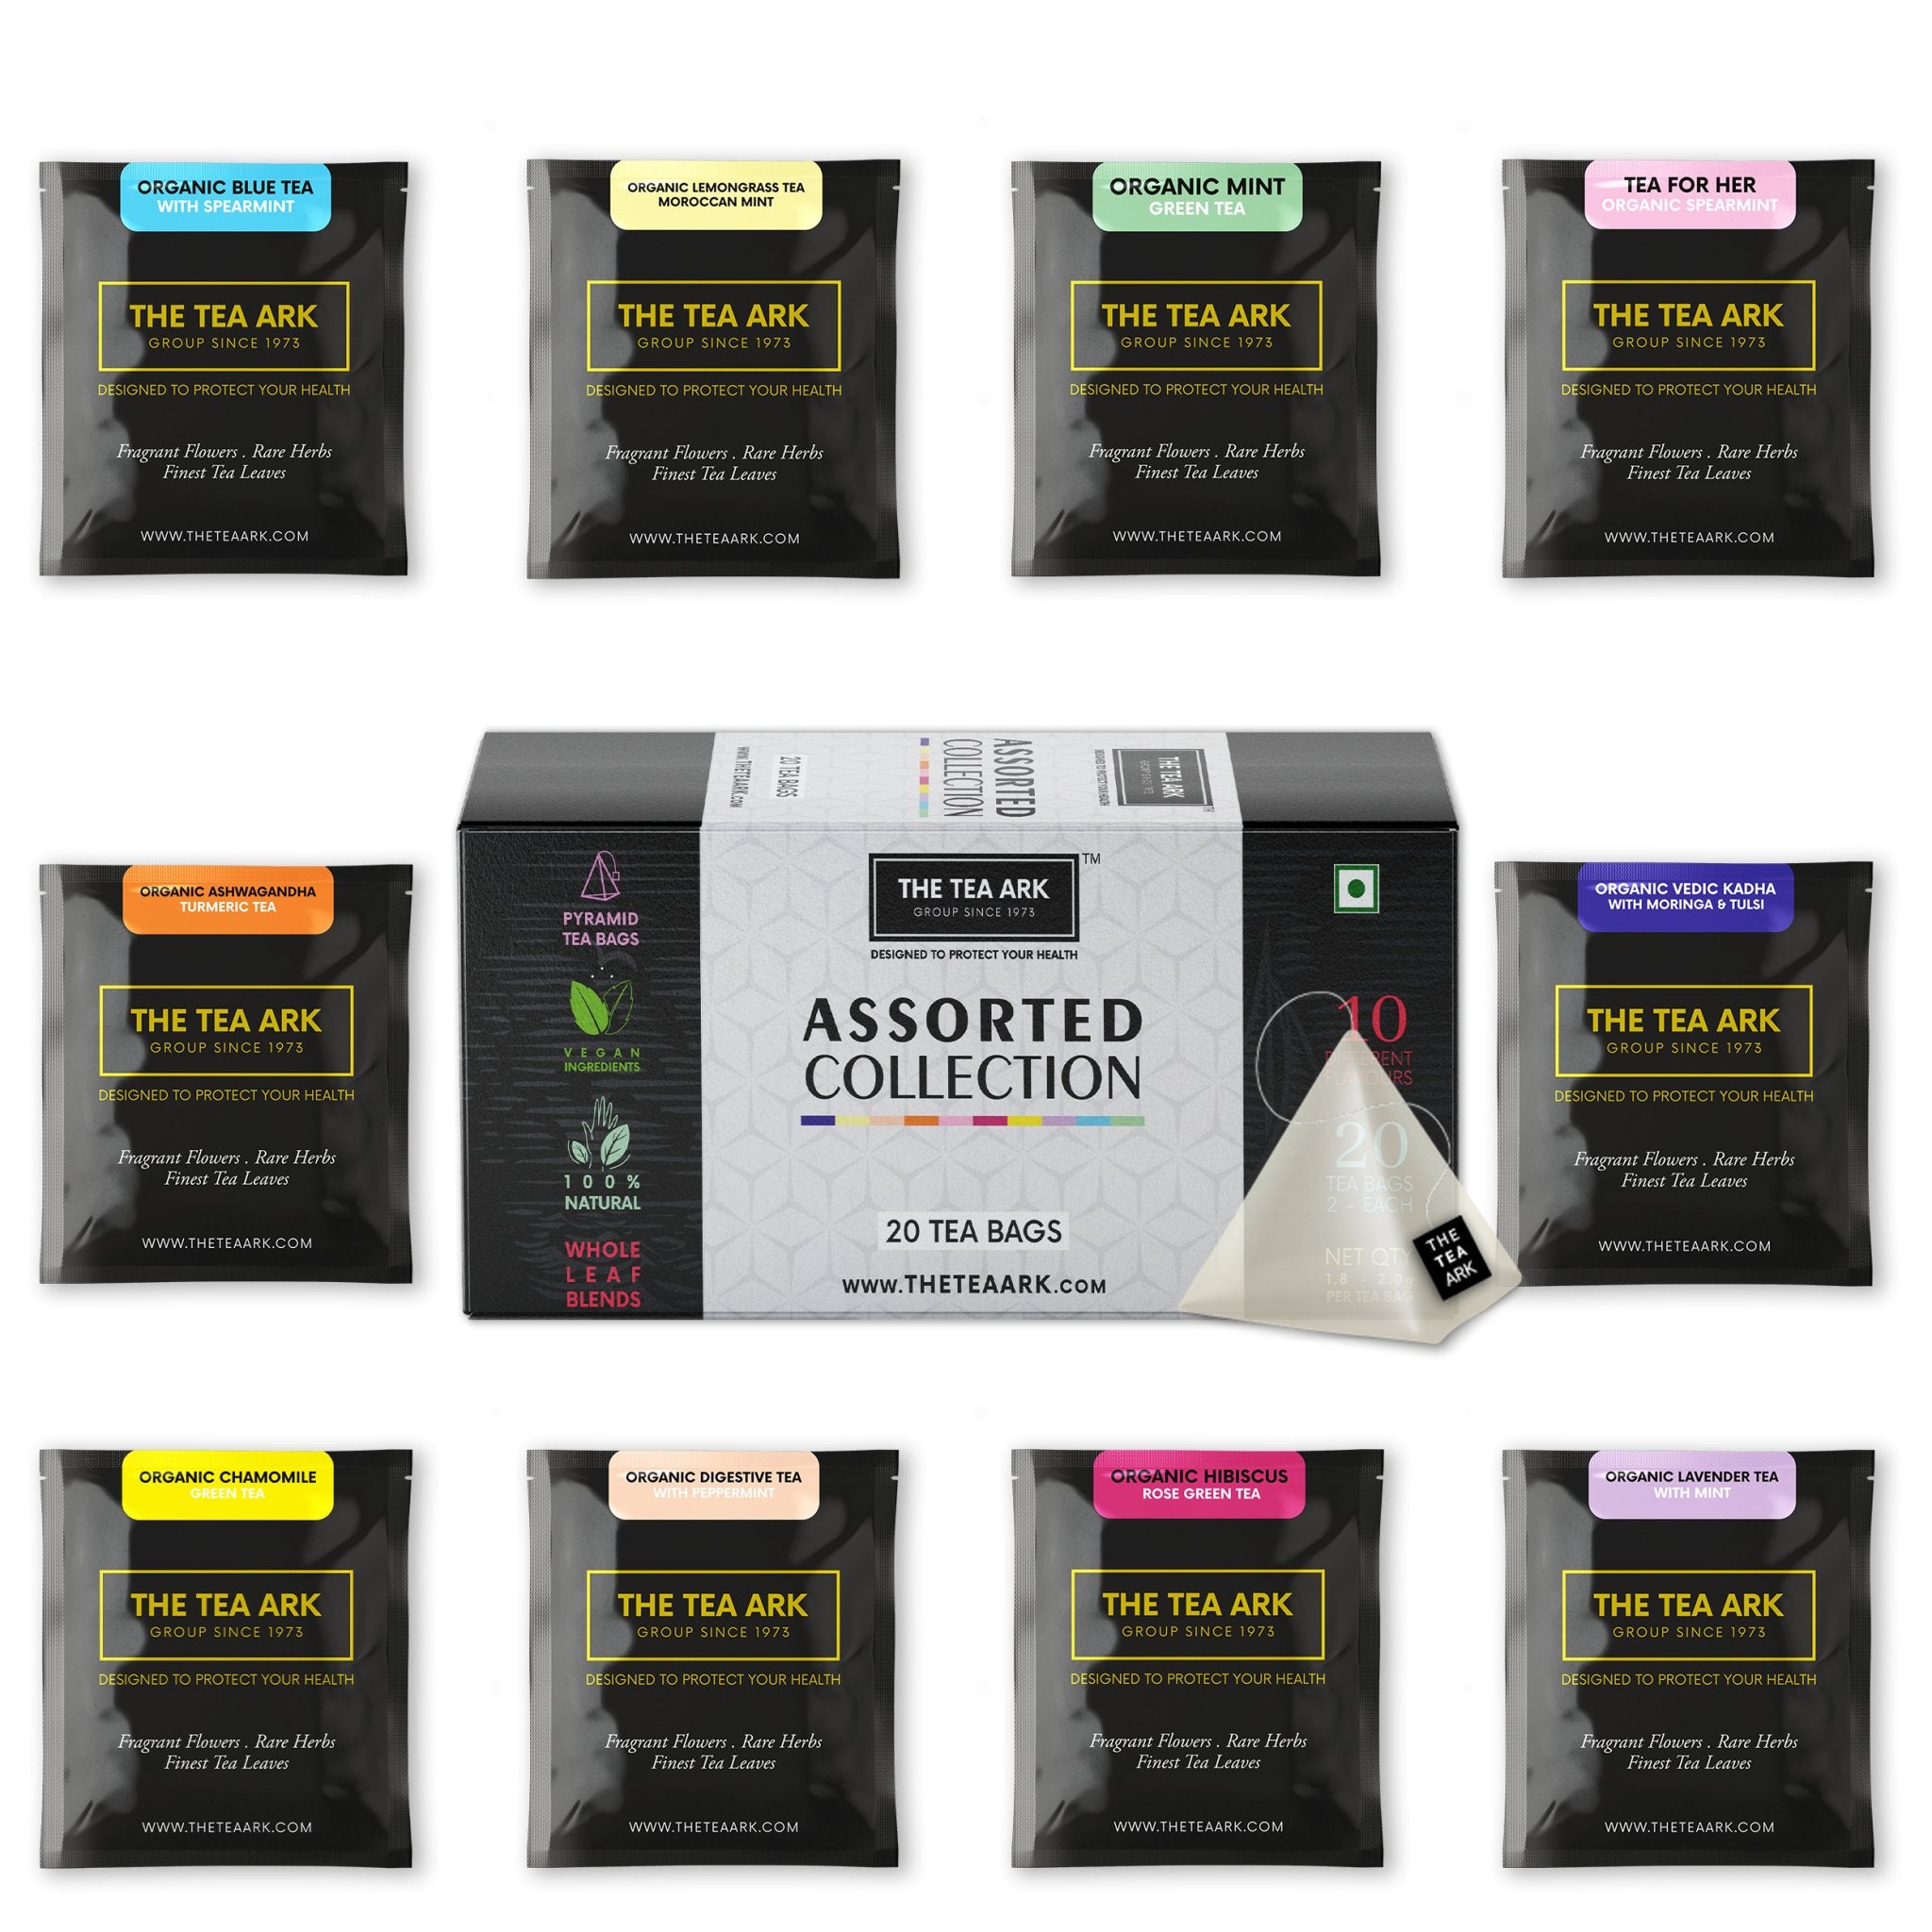 The Tea Ark Assorted Collection Pyramid Tea Bags, 10 Variants with 2 Pcs Each, Whole Leaf Blends, Sampler Pack - 20 Tea Bags - Inlife Pharma Private Limited